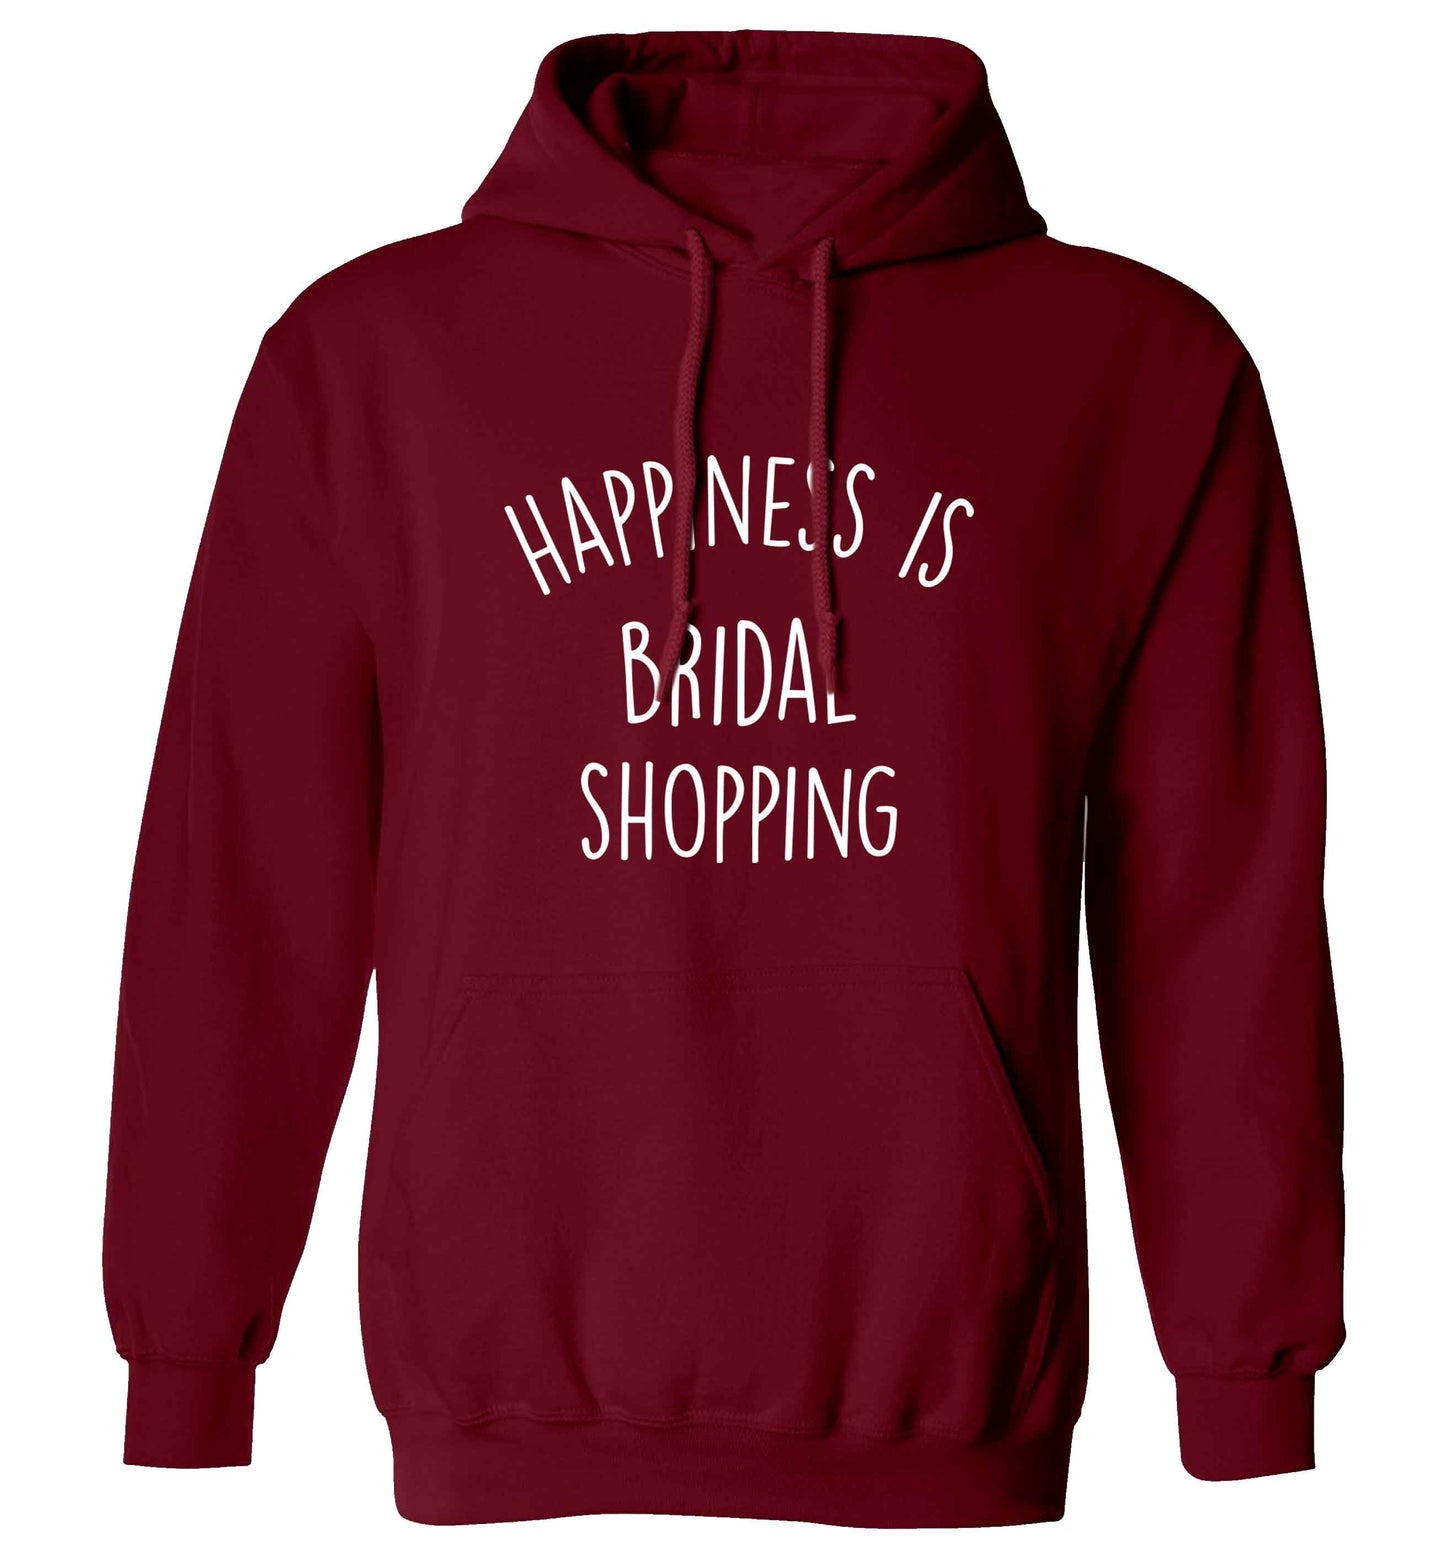 Happiness is bridal shopping adults unisex maroon hoodie 2XL